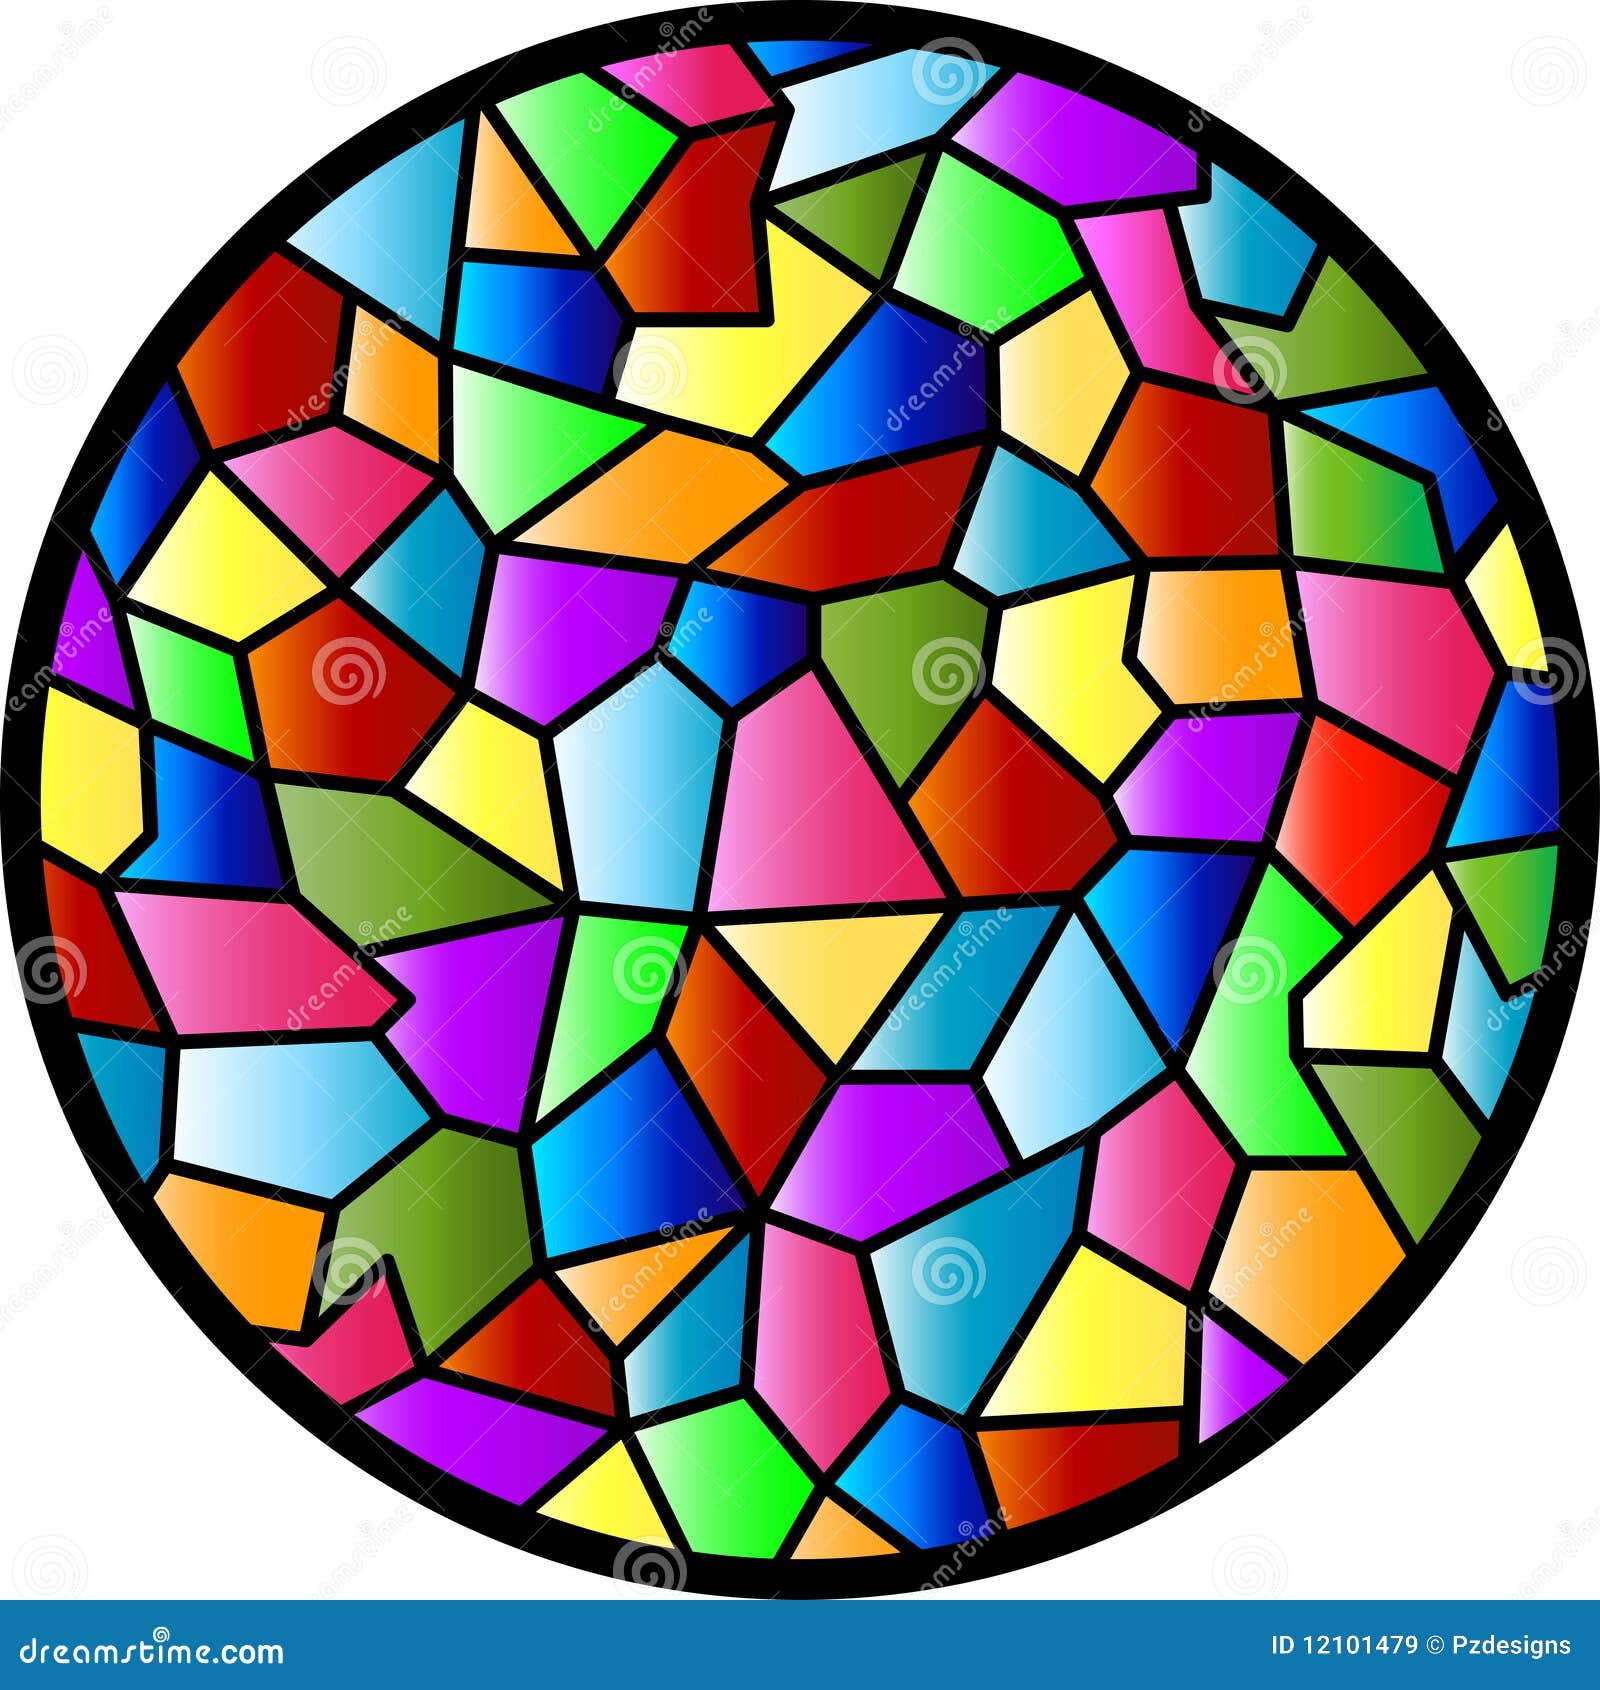 stained glass clipart - photo #20